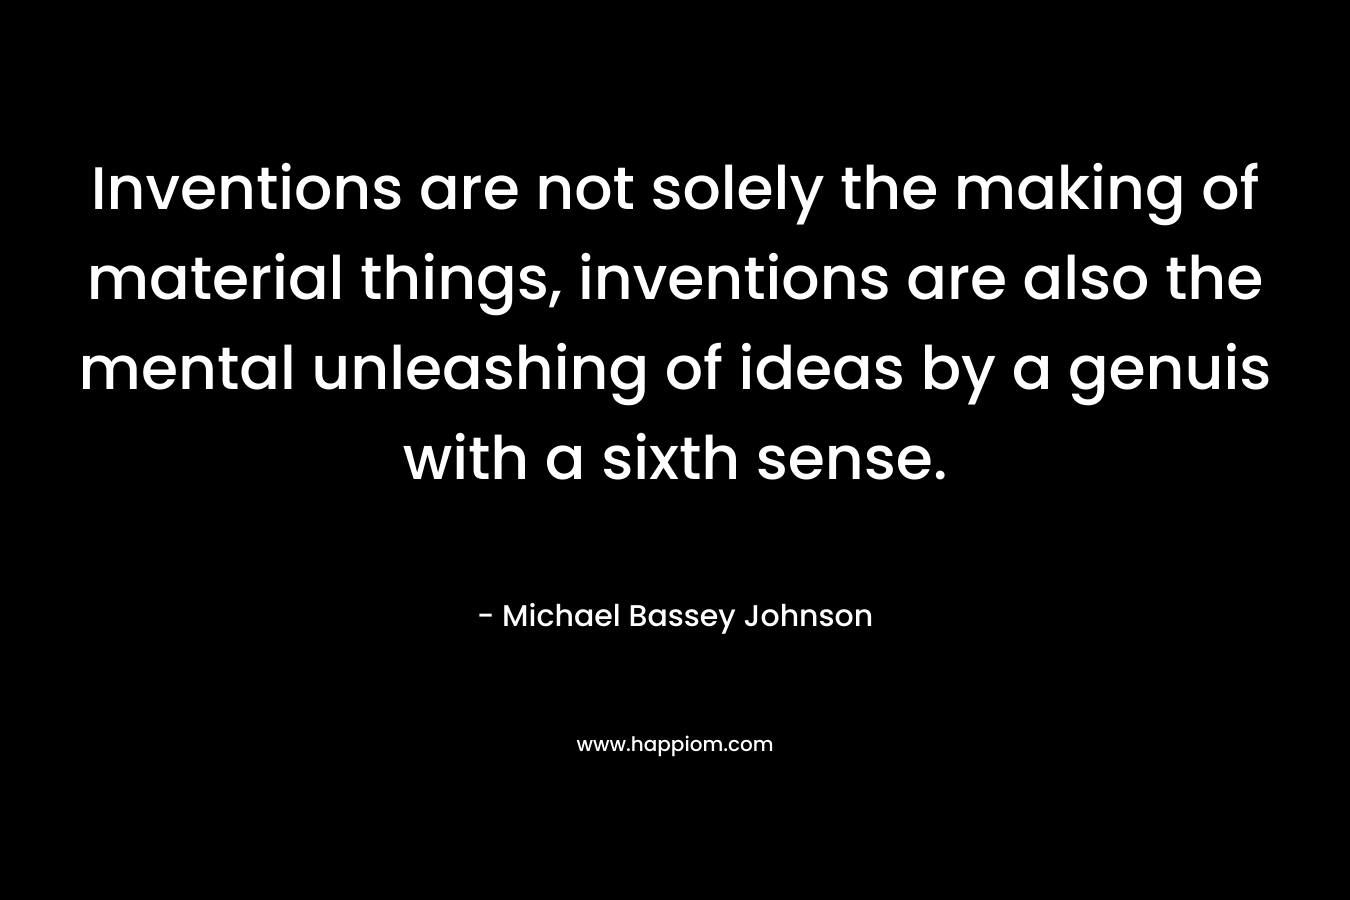 Inventions are not solely the making of material things, inventions are also the mental unleashing of ideas by a genuis with a sixth sense. – Michael Bassey Johnson